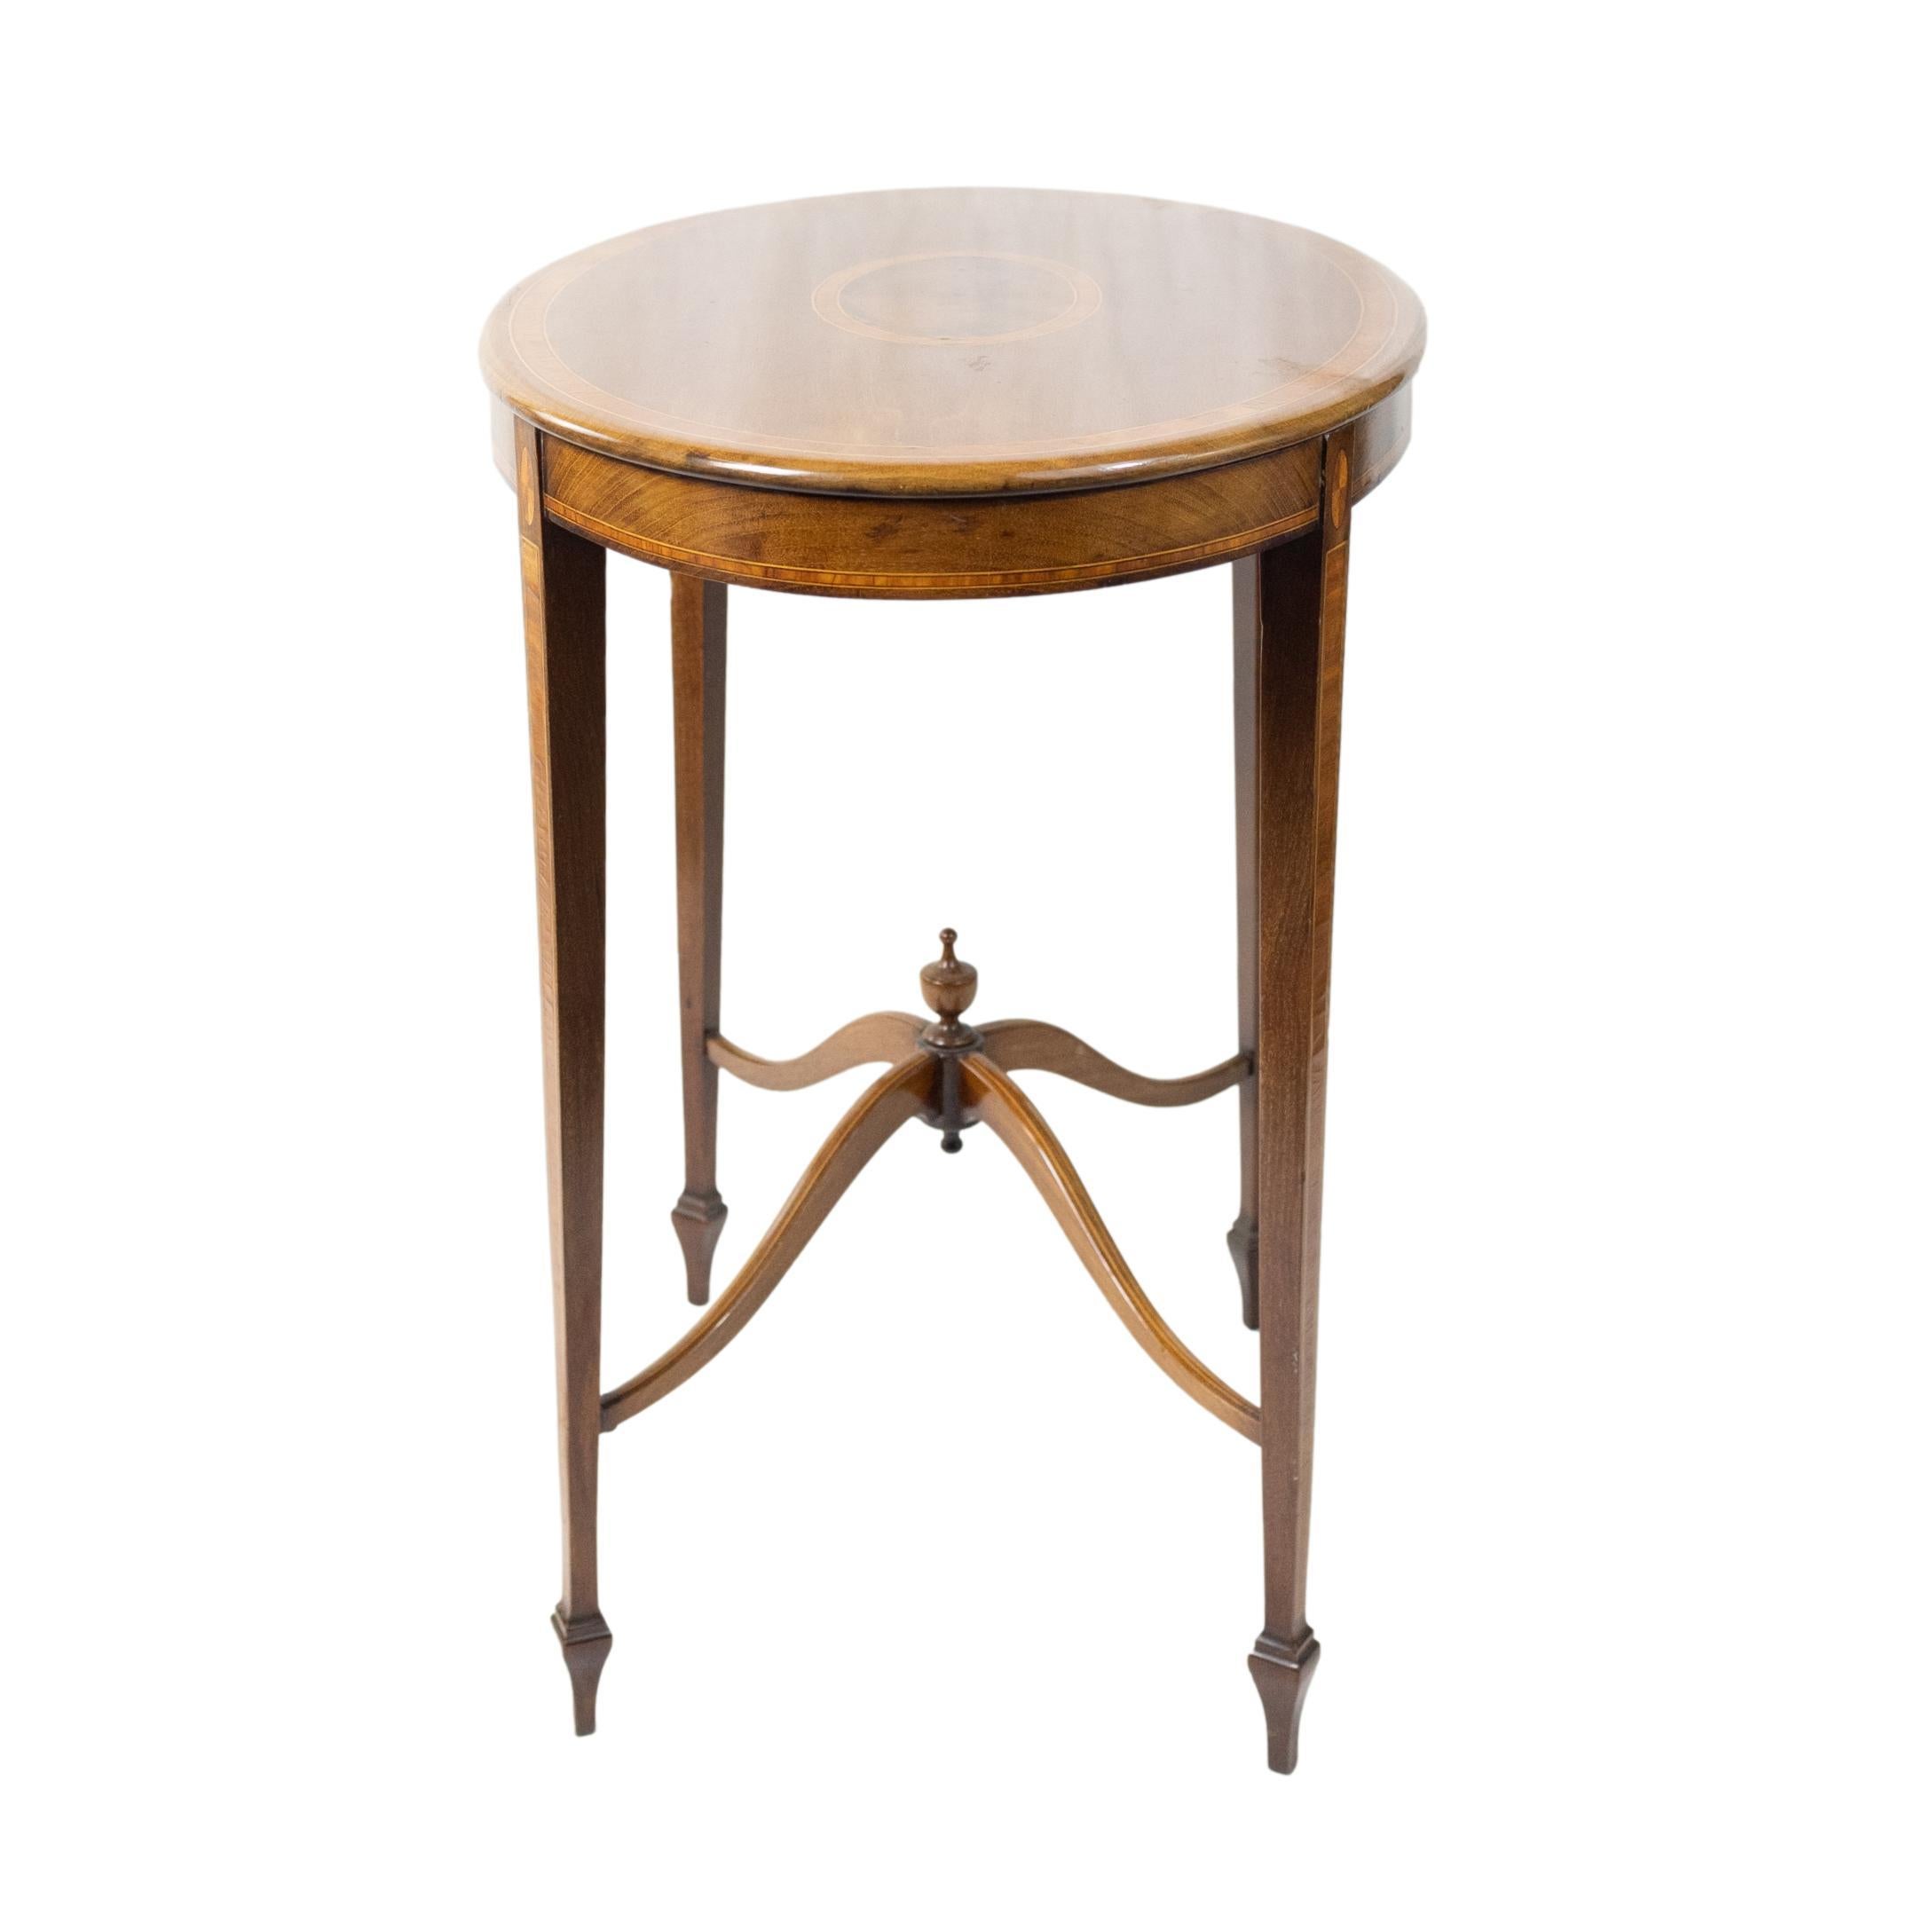 Hand-Crafted Figured Mahogany and Satinwood-Inlaid Oval Occasional Table, English, ca. 1890 For Sale